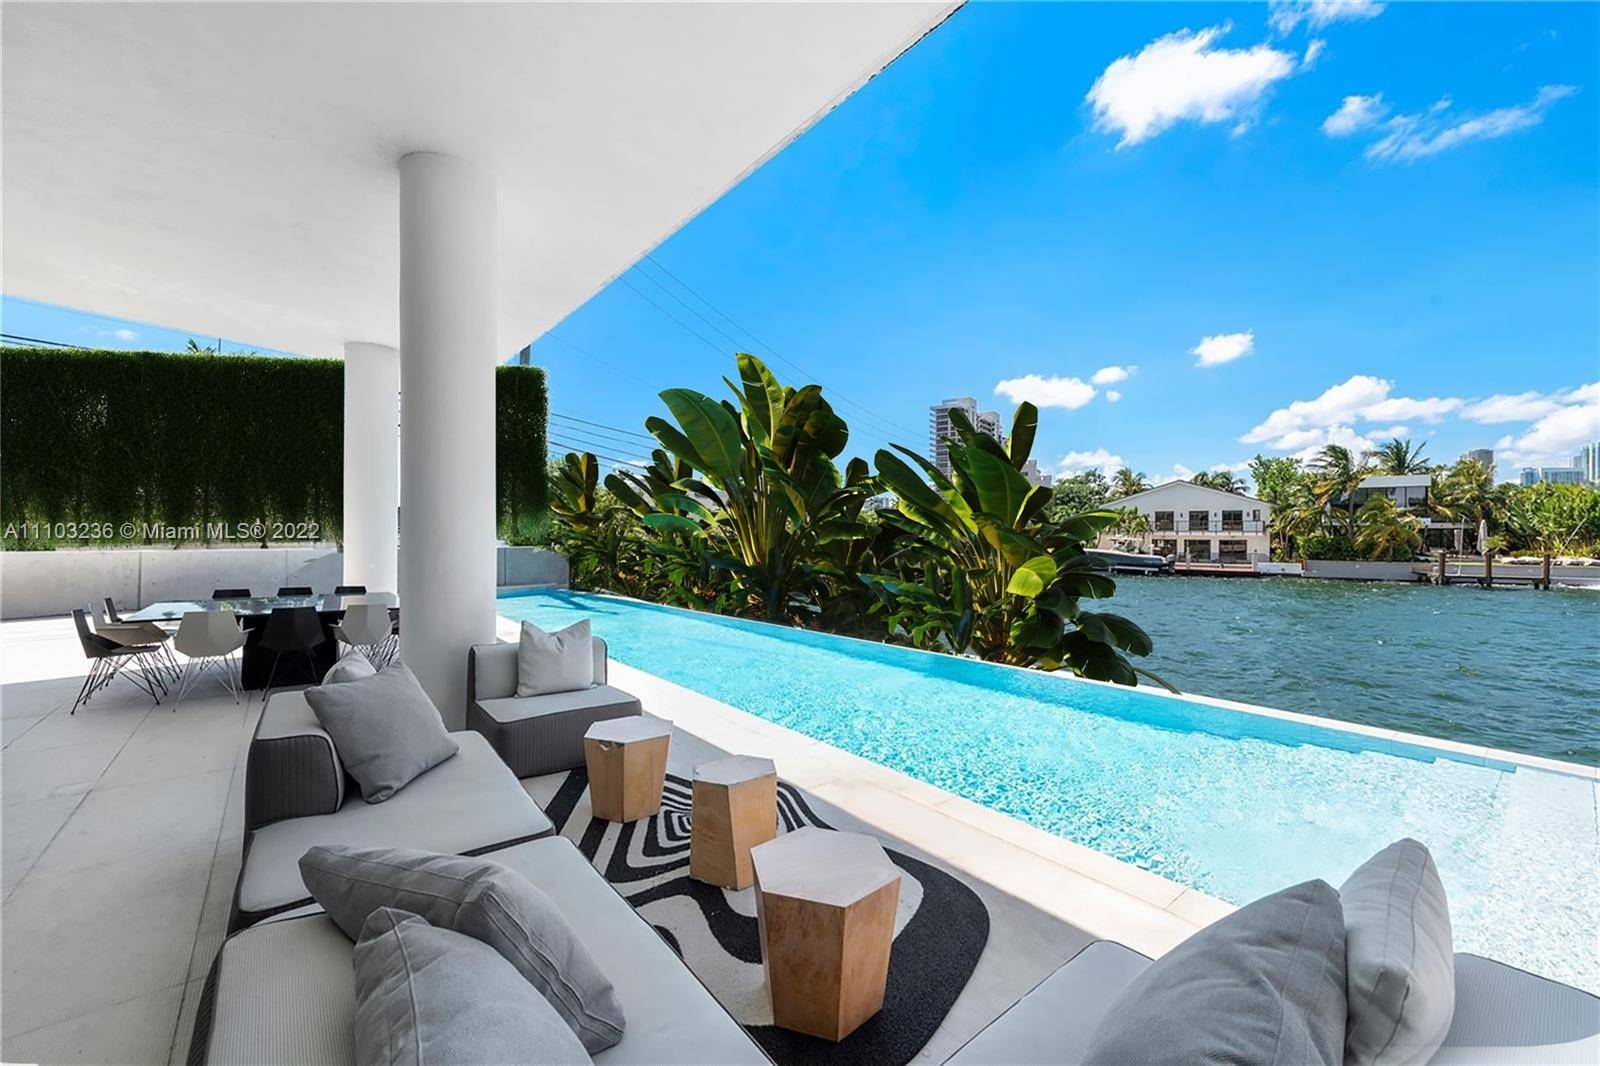 Tropical Modern 8, 871 SF estate on the wonderful Venetian Islands will certainly impress upon arrival.